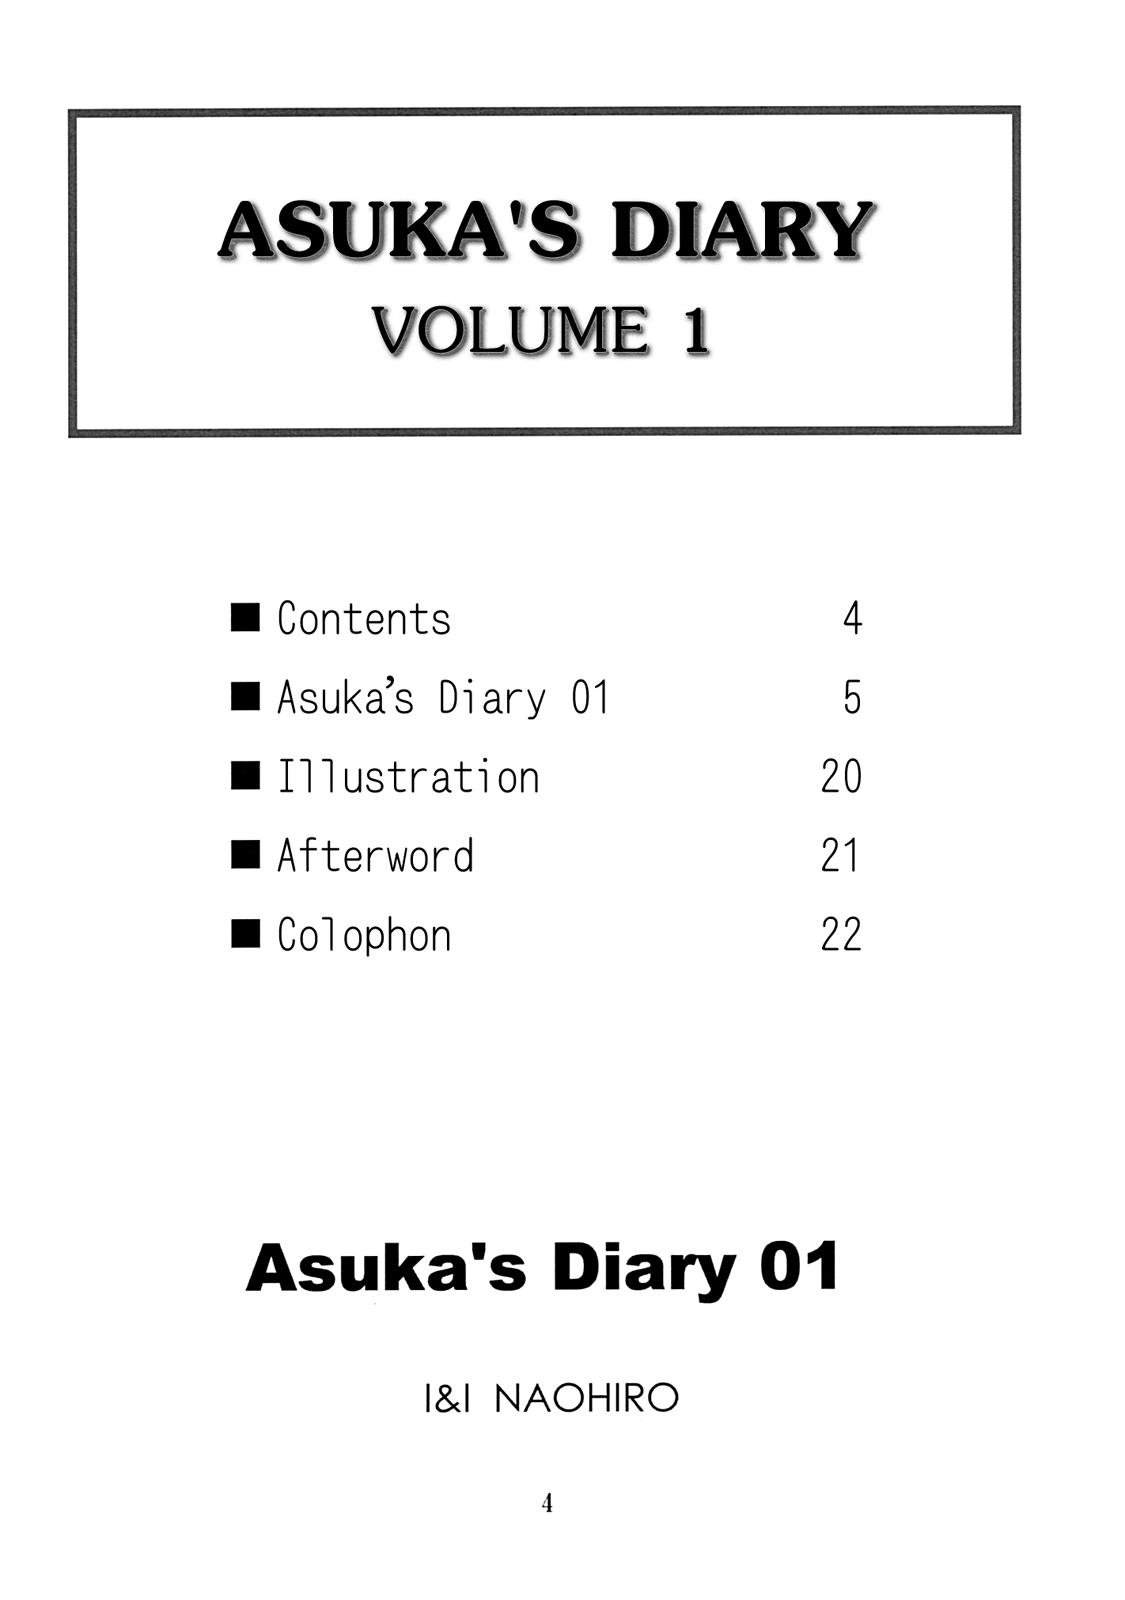 Classic Asuka's Diary 01 - Neon genesis evangelion Adult Toys - Page 4